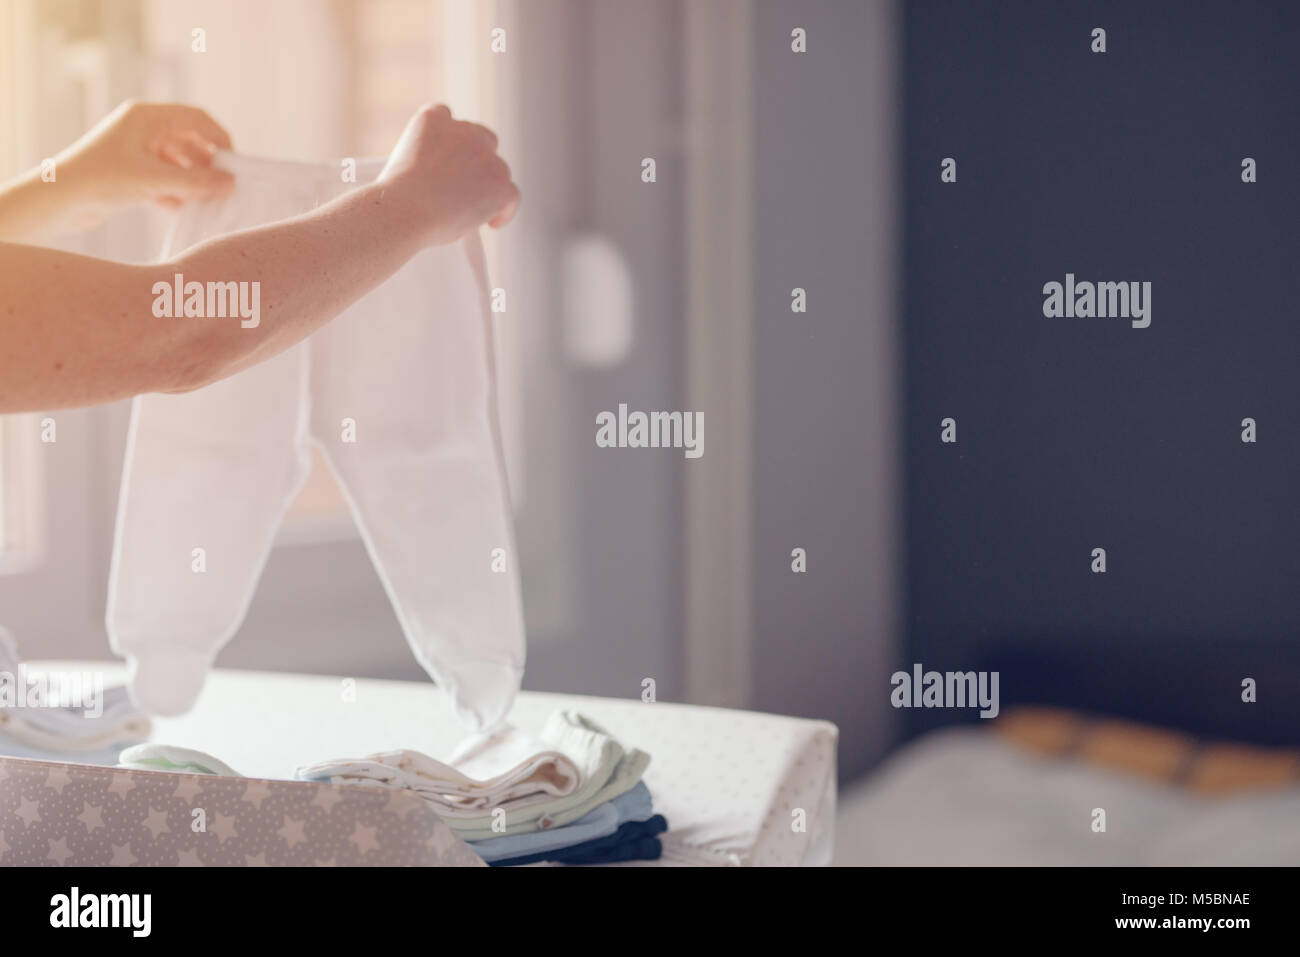 Mother sorting newborn baby clothing for ironing at home as part of everyday routine in child care, selective focus Stock Photo